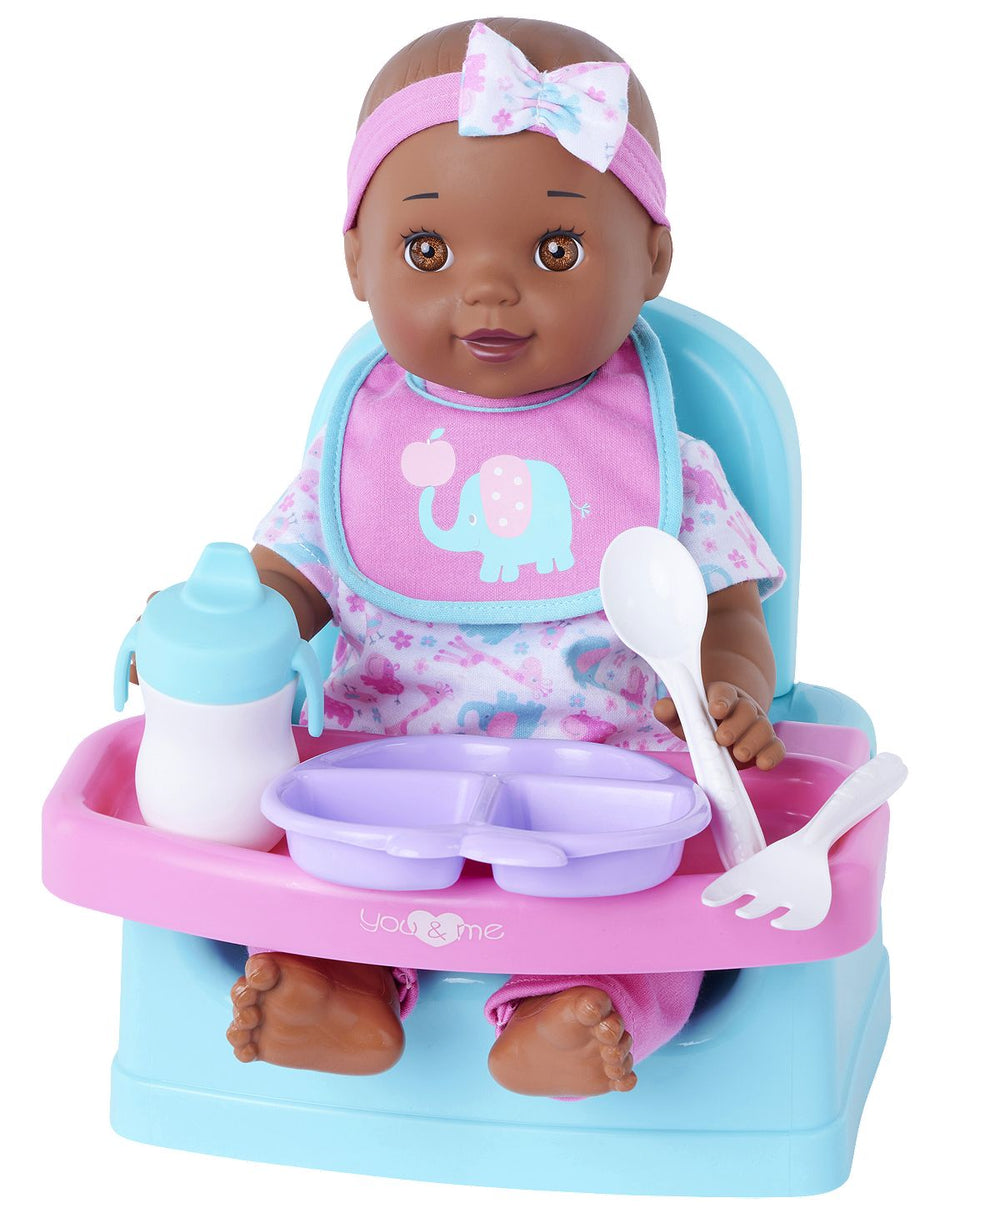 You & Me 14-inch Hungry Baby Doll with Feeding Accessories